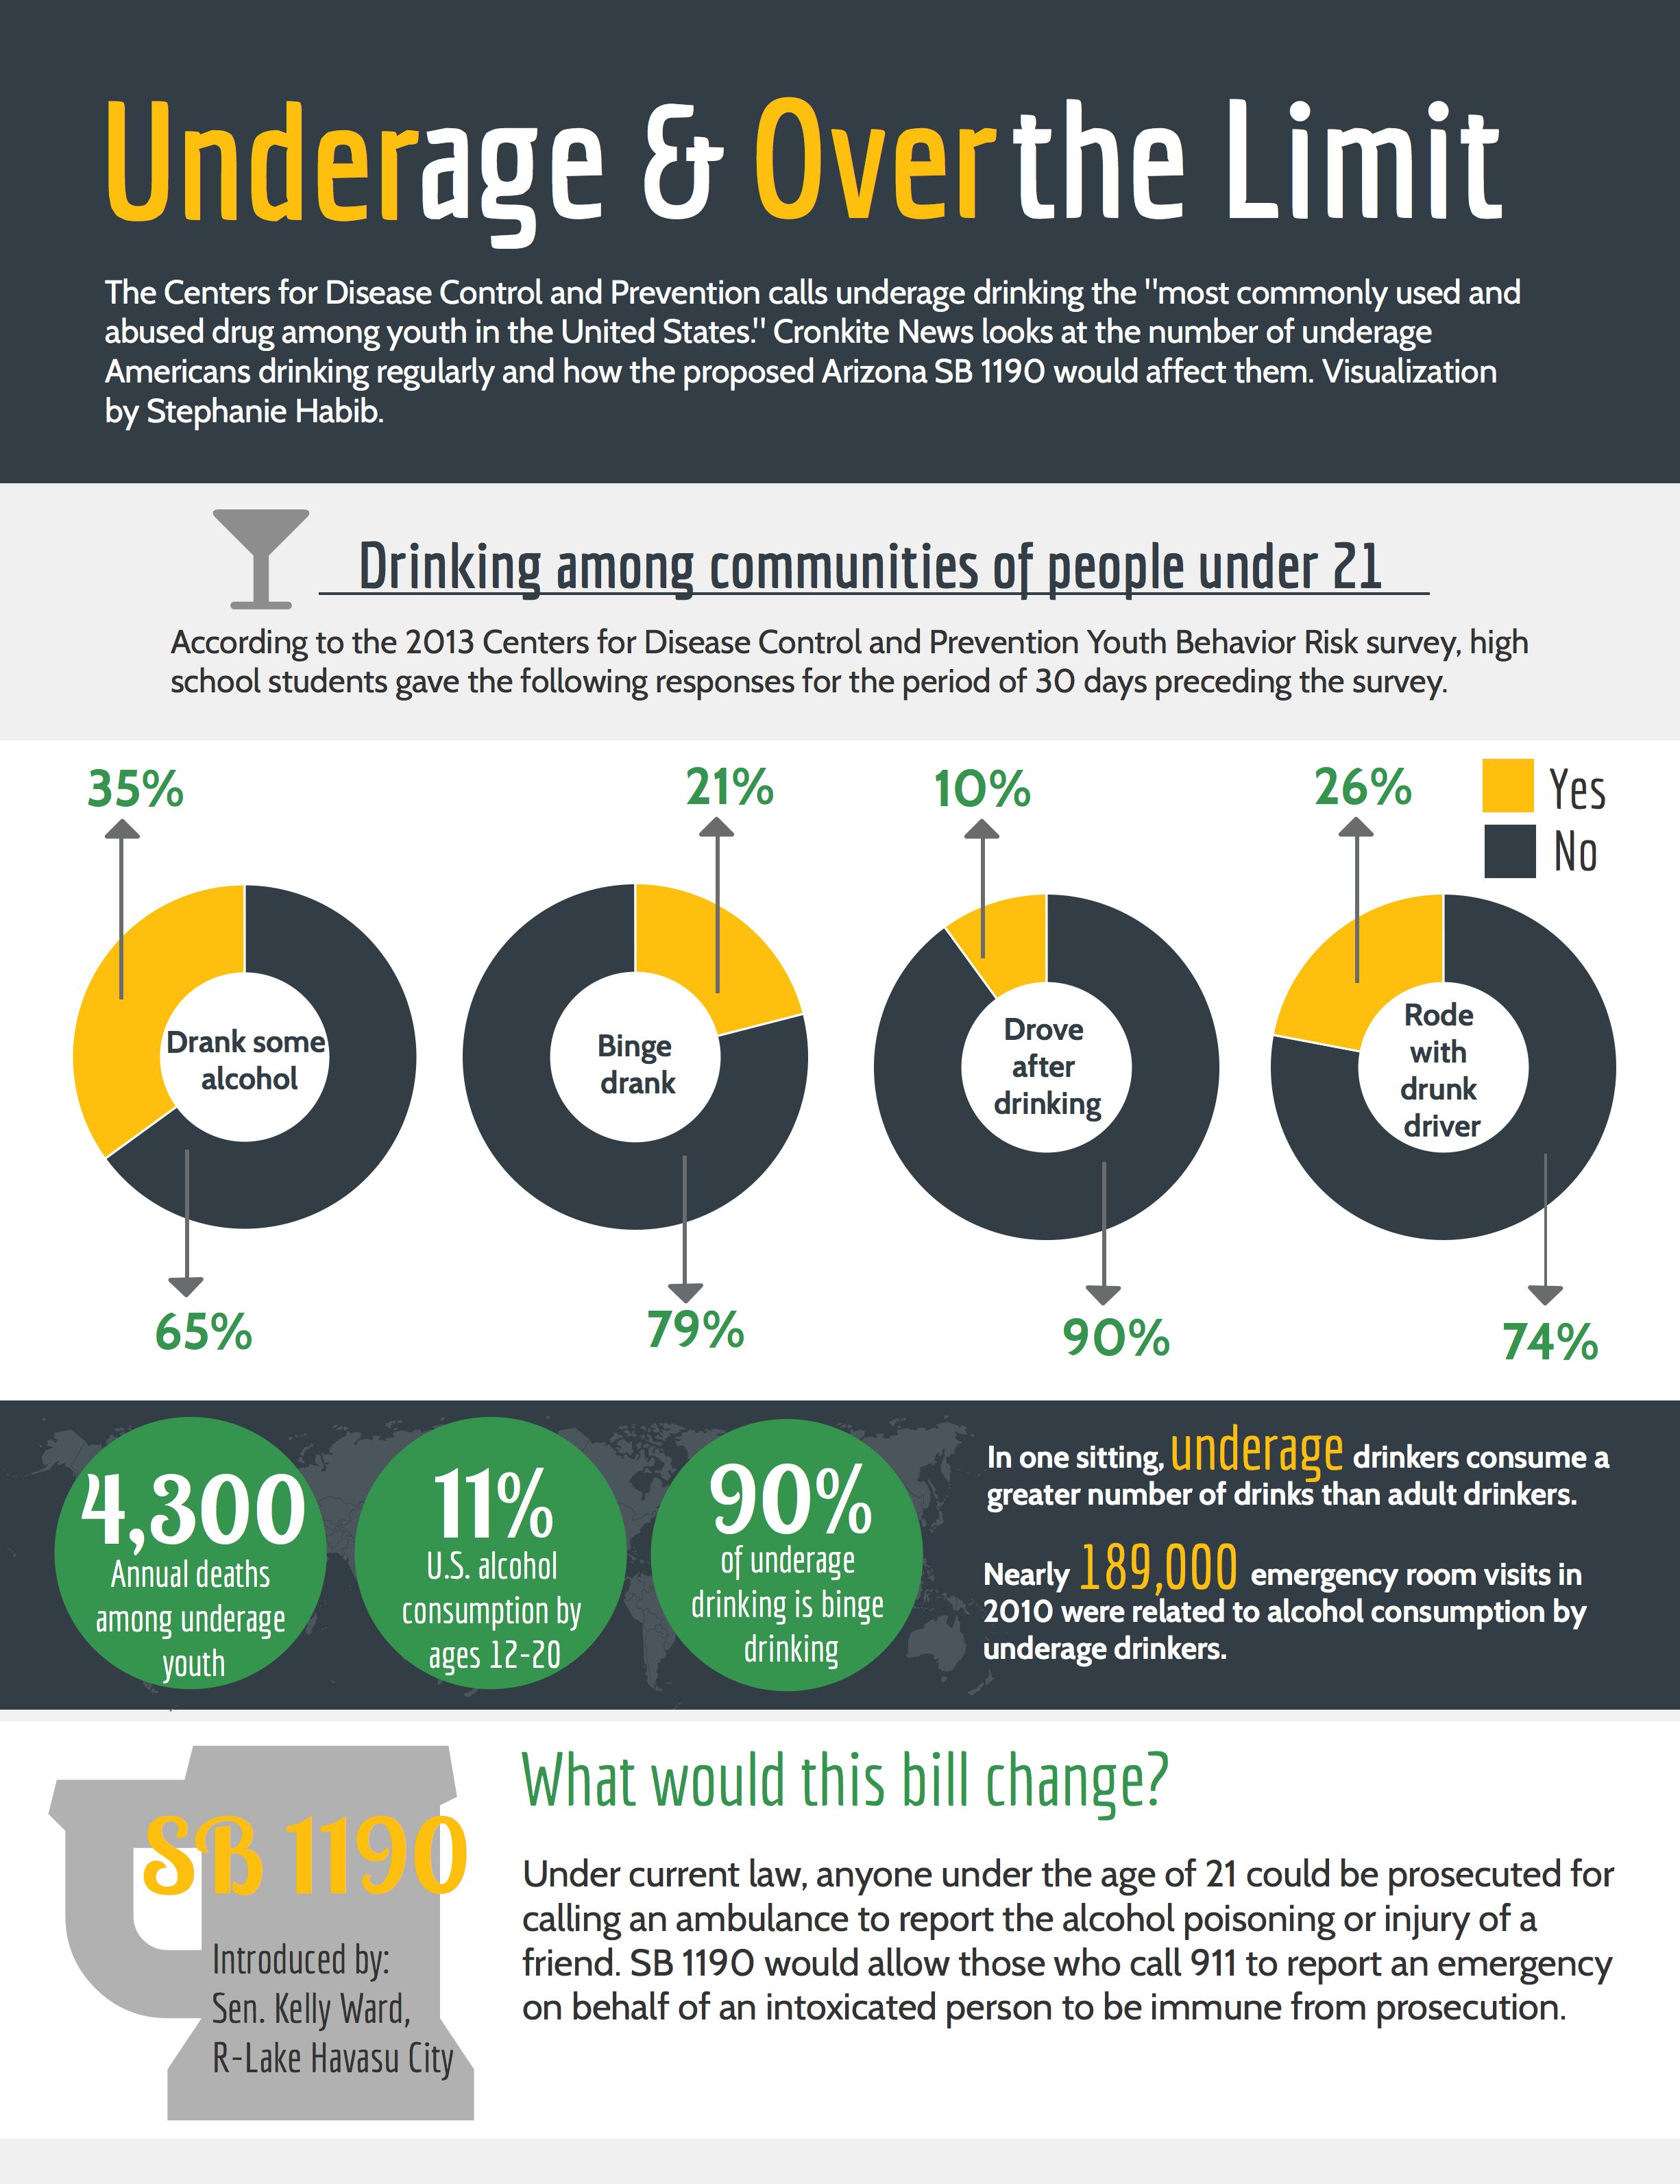 legal drinking age in new york state